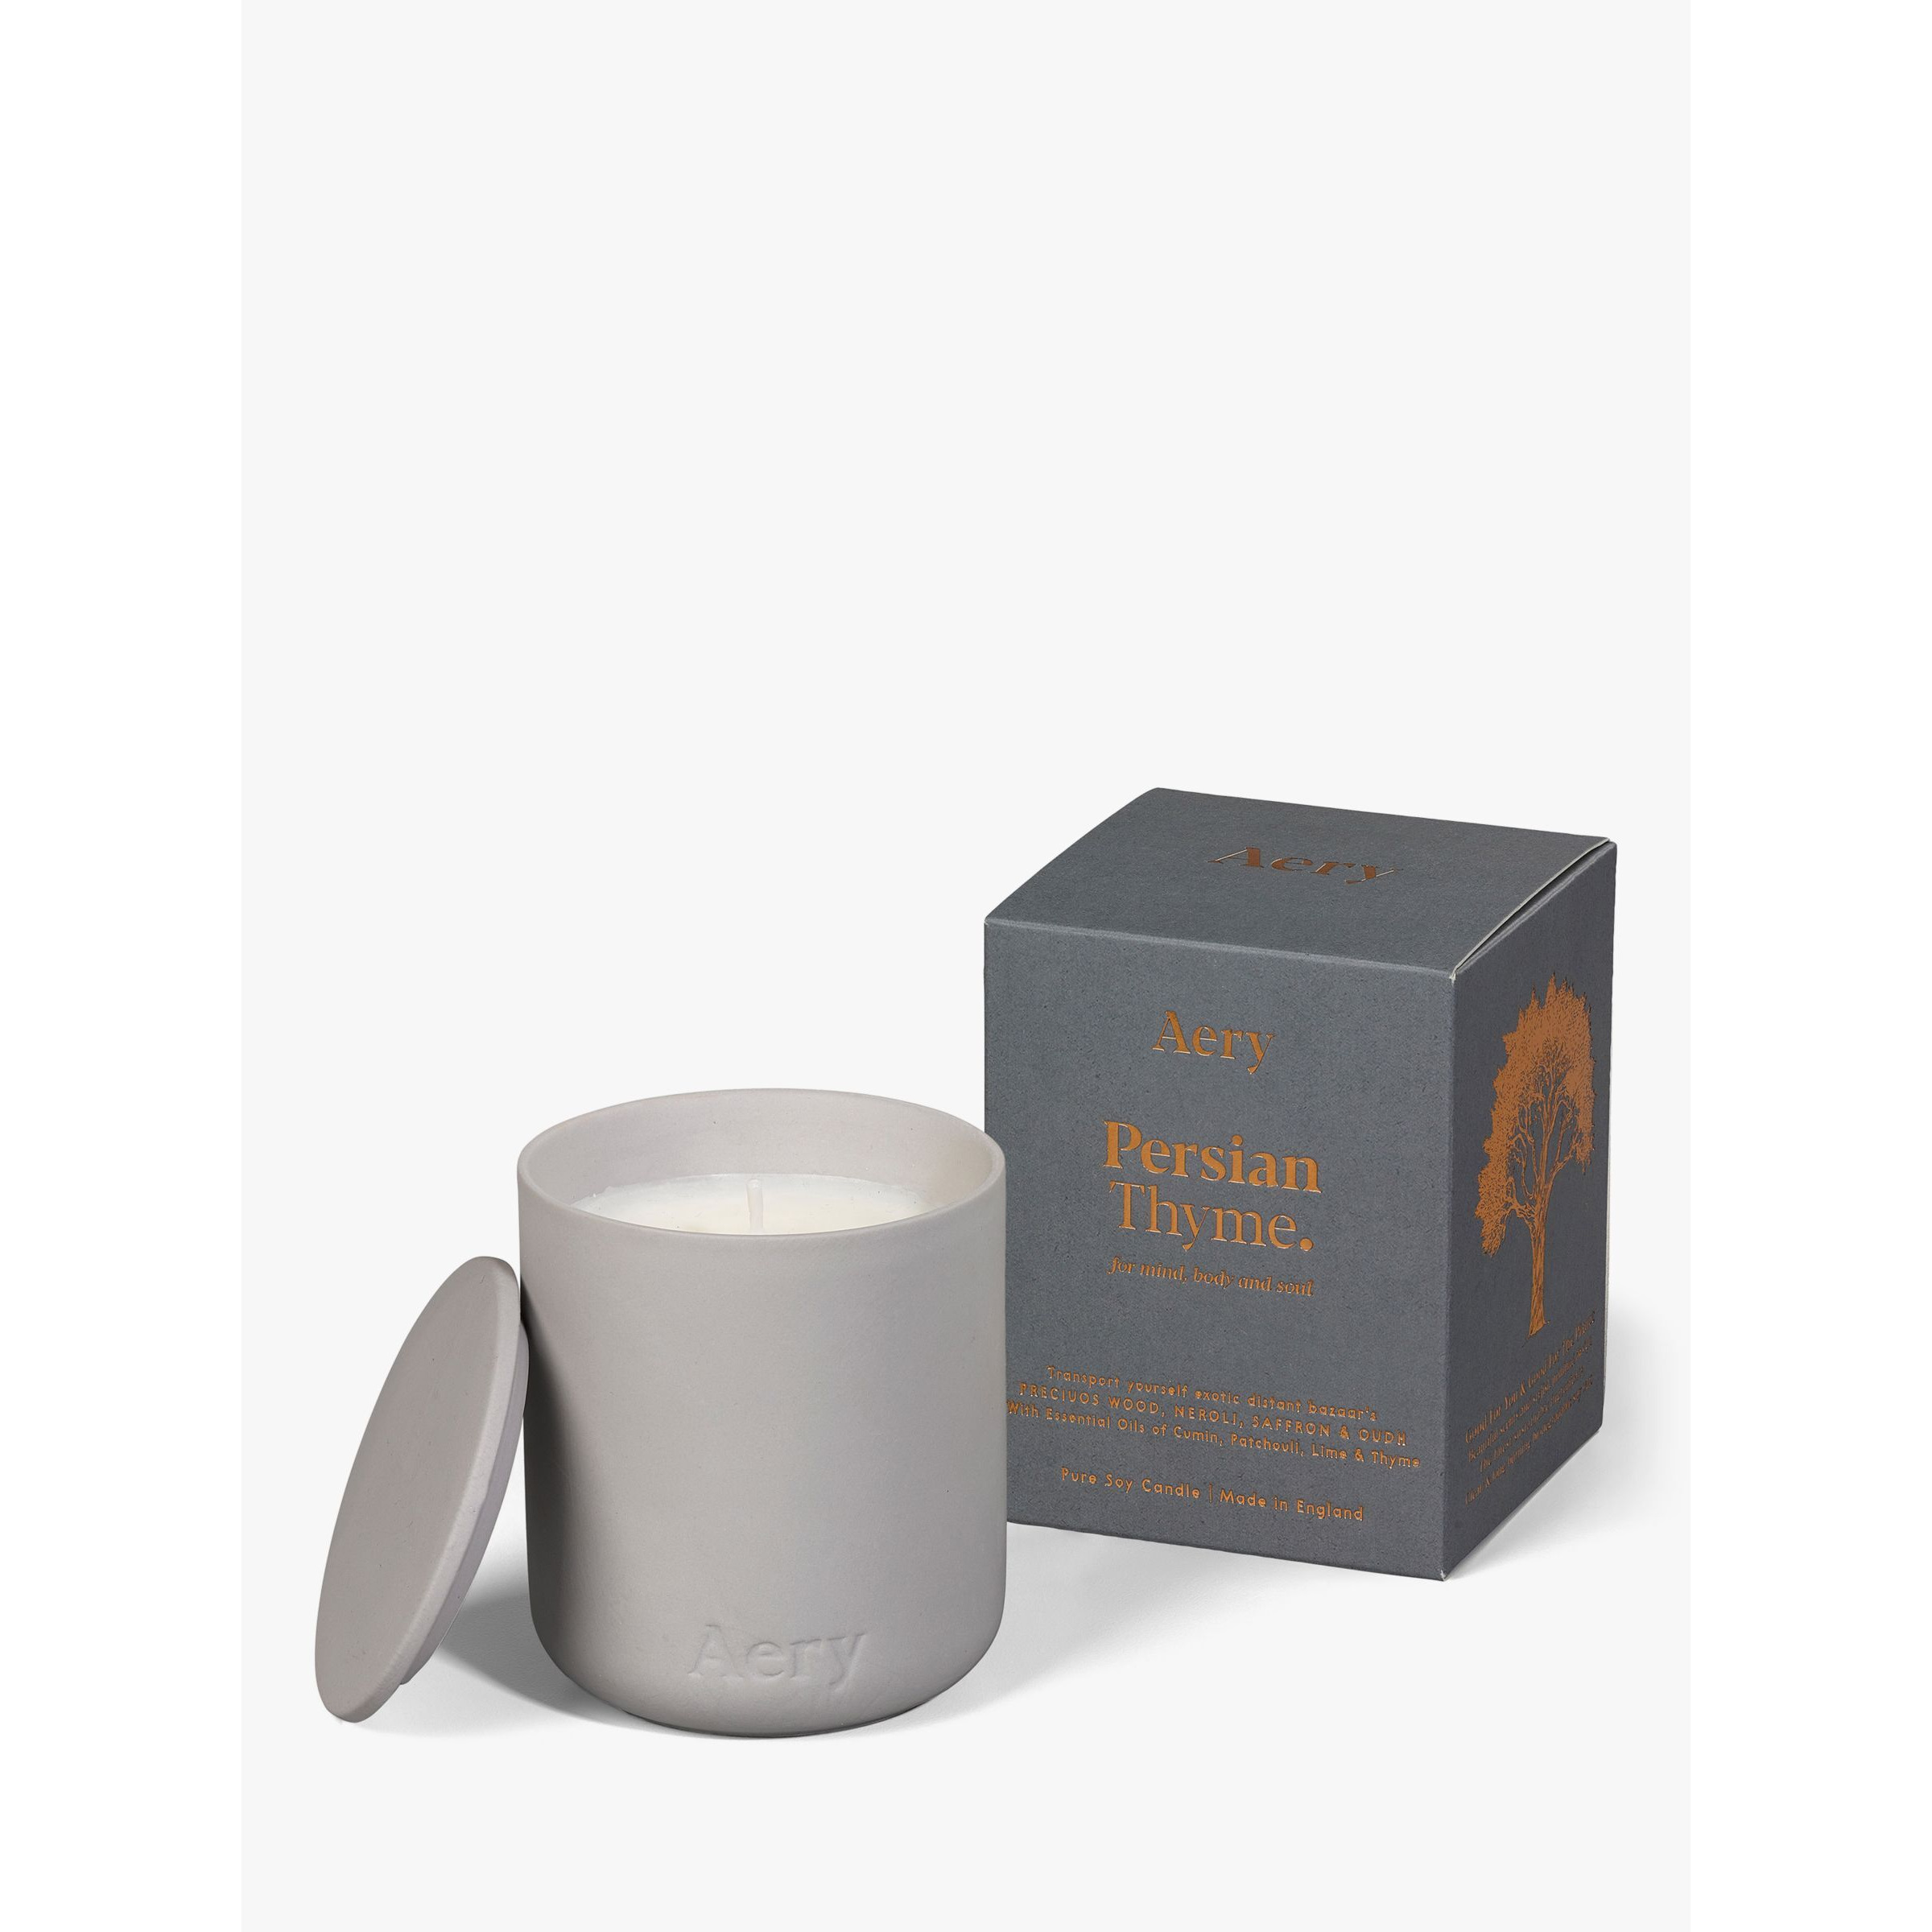 Aery Persian Thyme Scented Candle, 280g - image 1